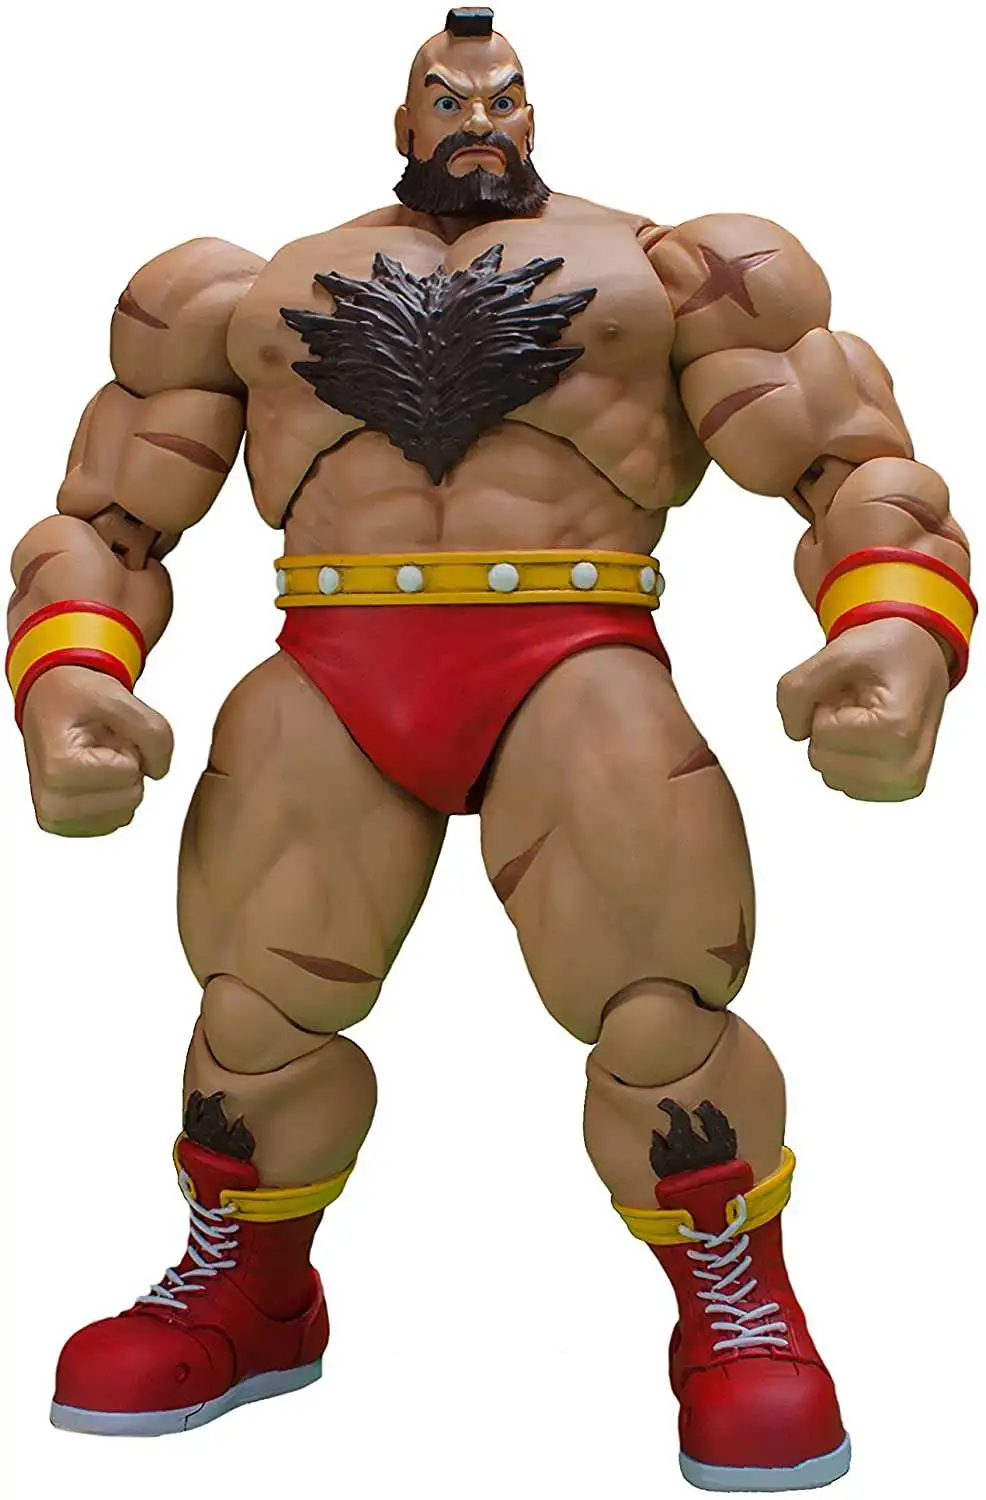 Storm collectibles Zangief Action Figure Street Fighter 30th Anniversary  Toys